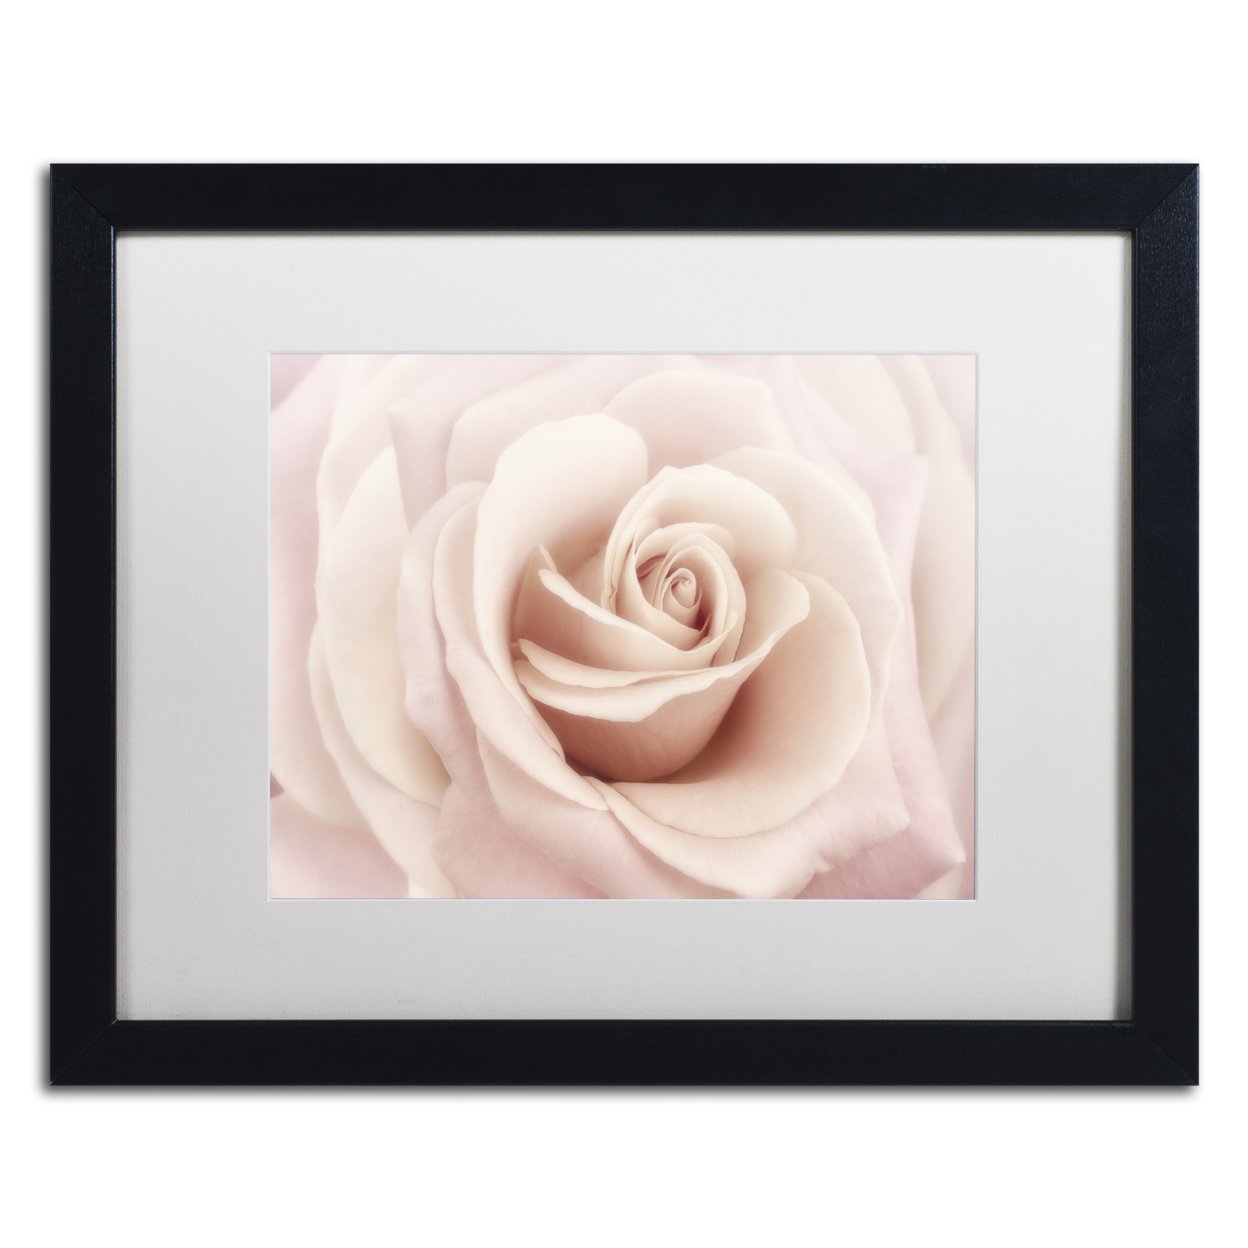 Cora Niele 'Peach Pink Rose' Black Wooden Framed Art 18 X 22 Inches